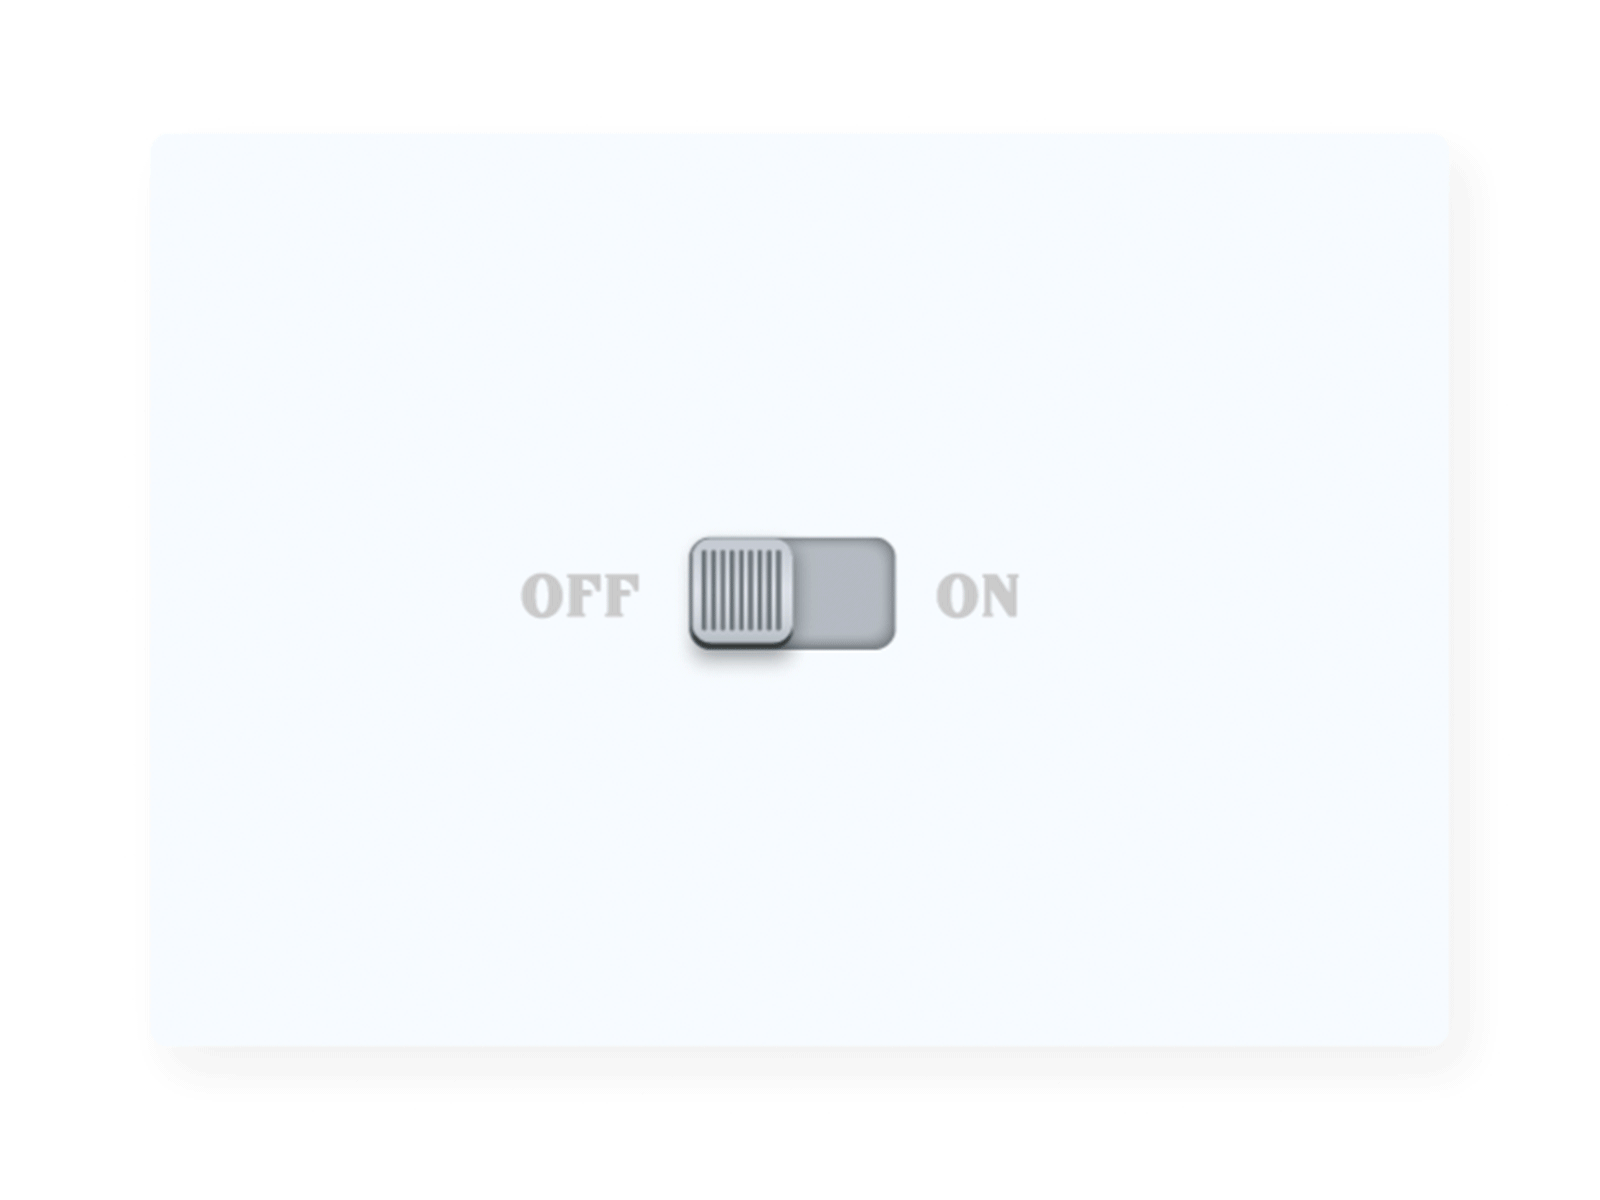 Switcher animation button deisgn motion off on skeuomorphic skeuomorphism switch toggle ui ux